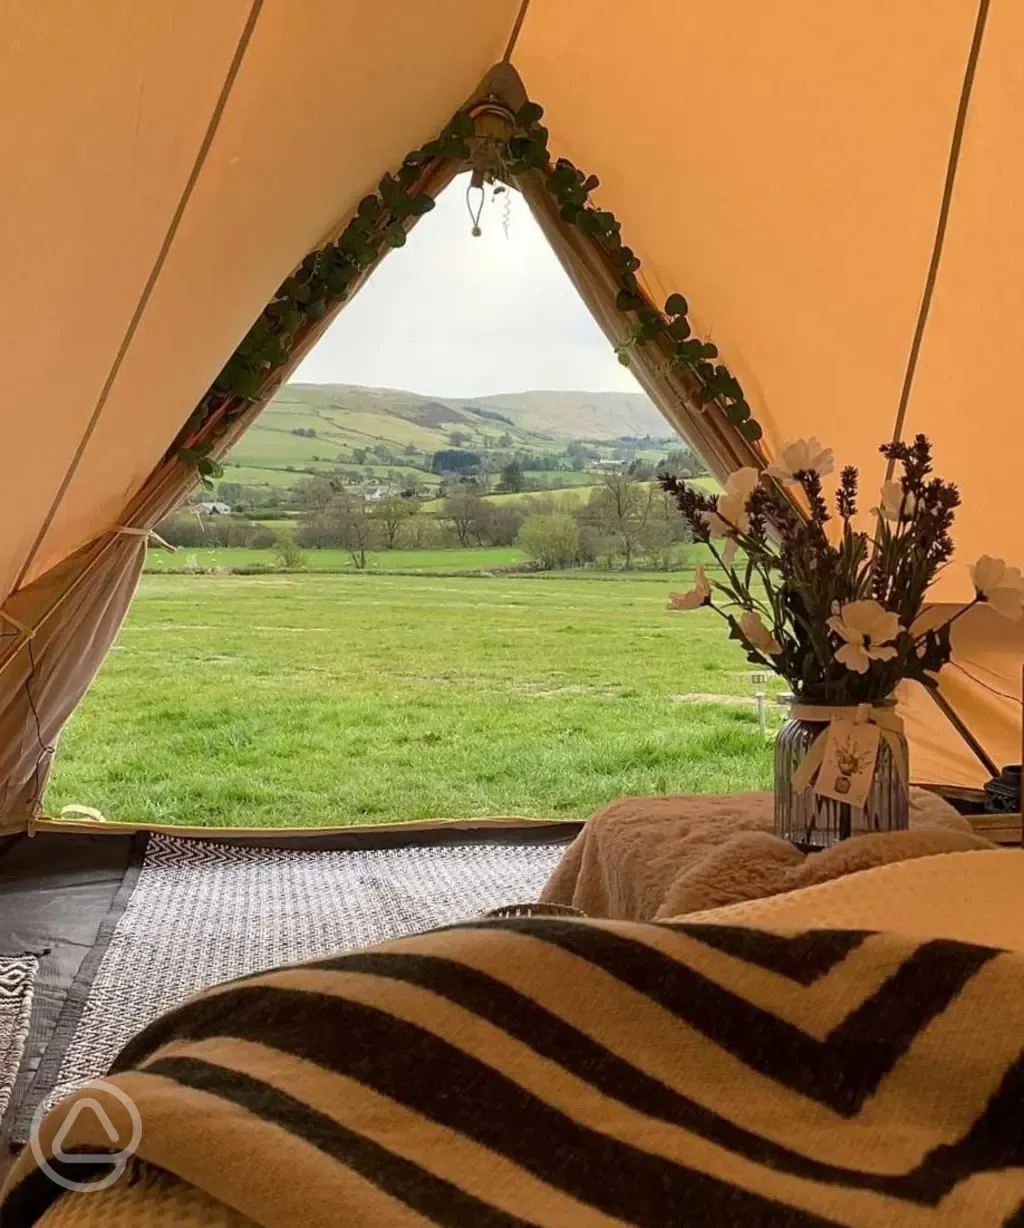 2nd bell tent view